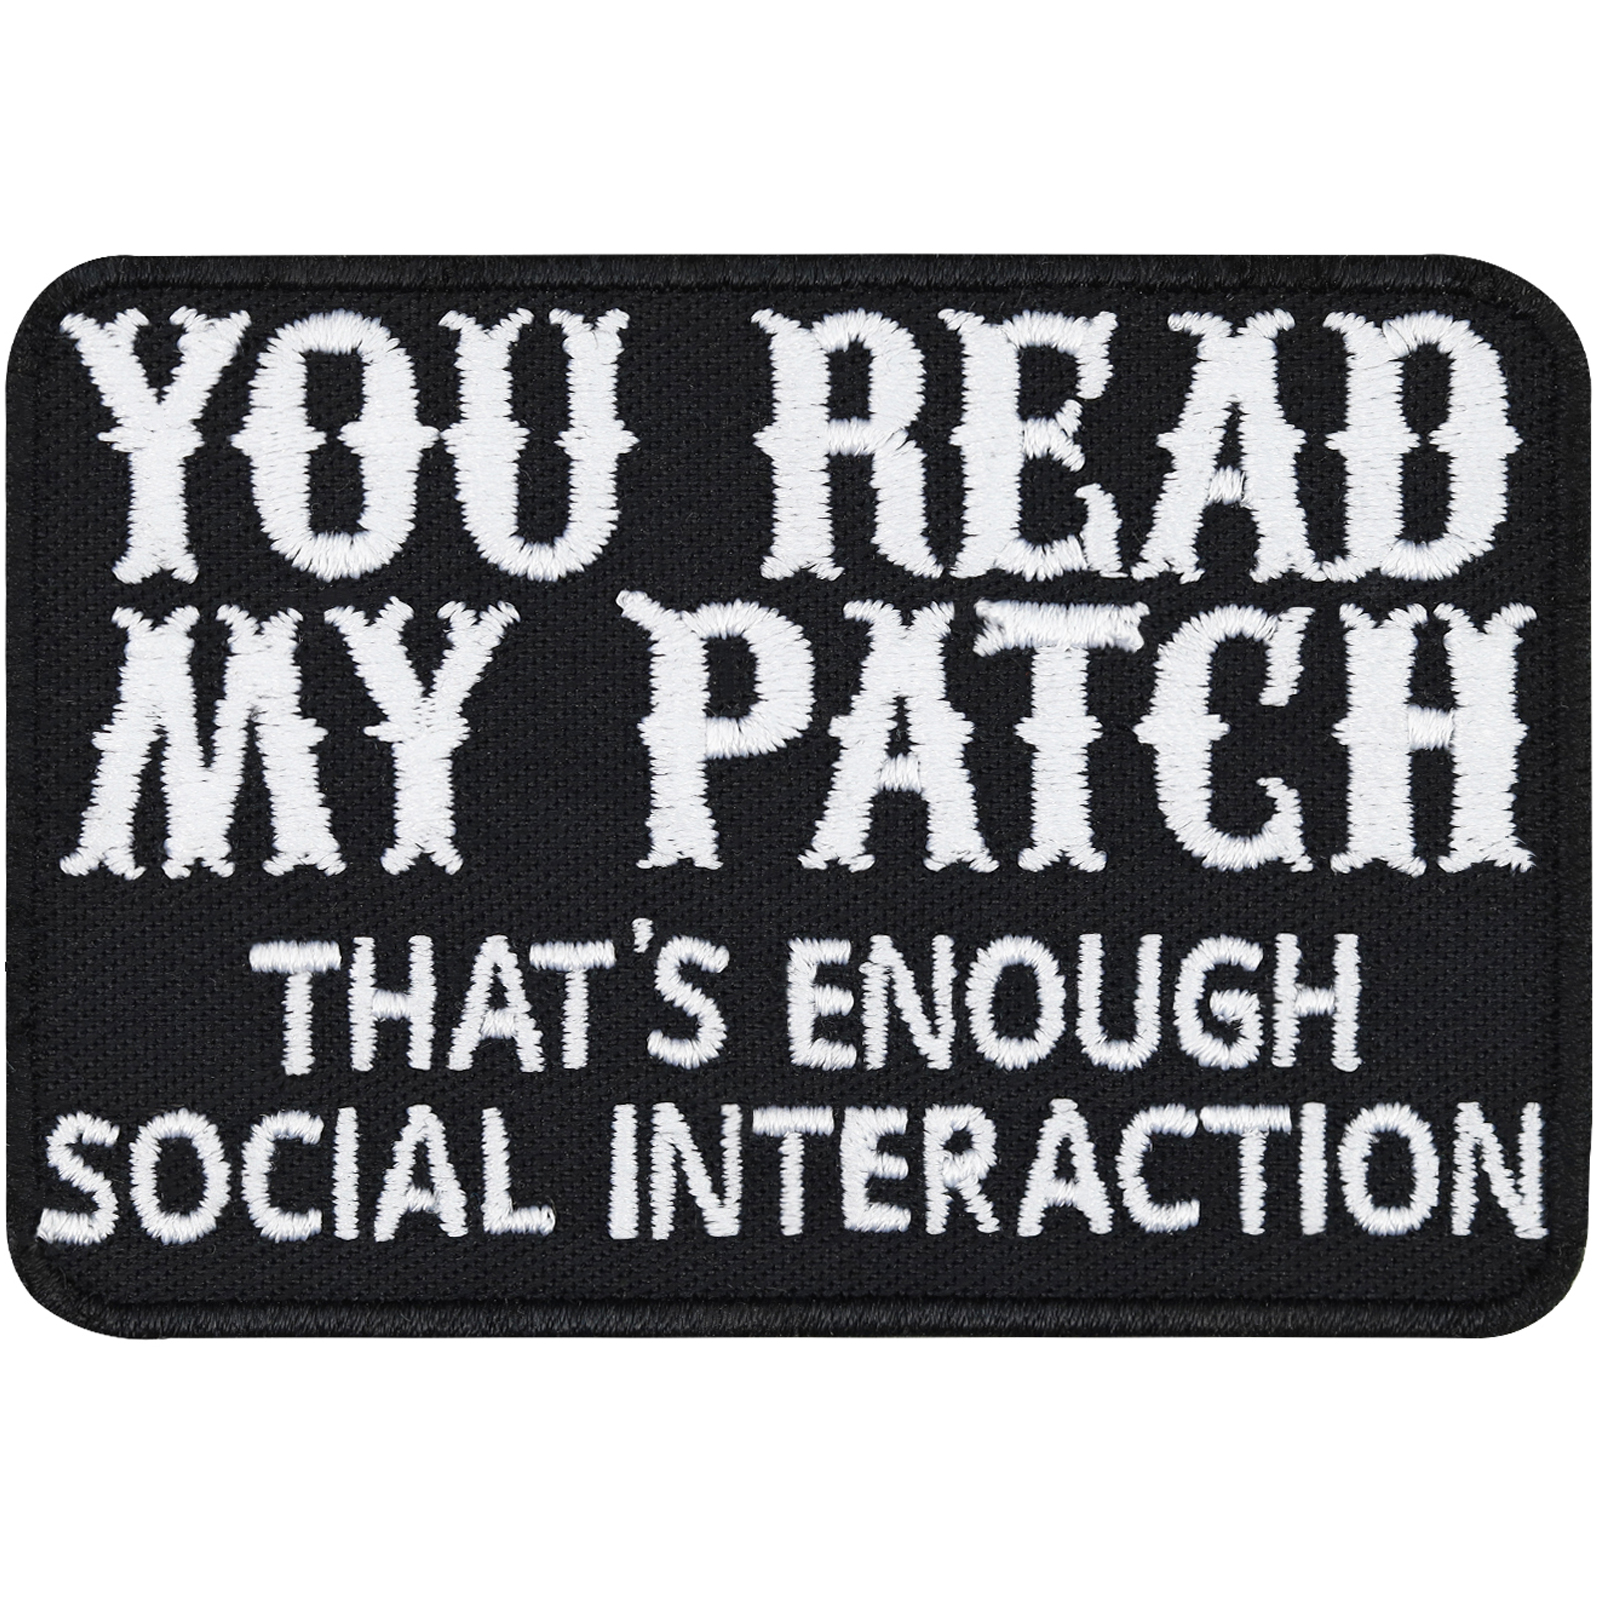 You read my patch, that's enough social interaction - Patch